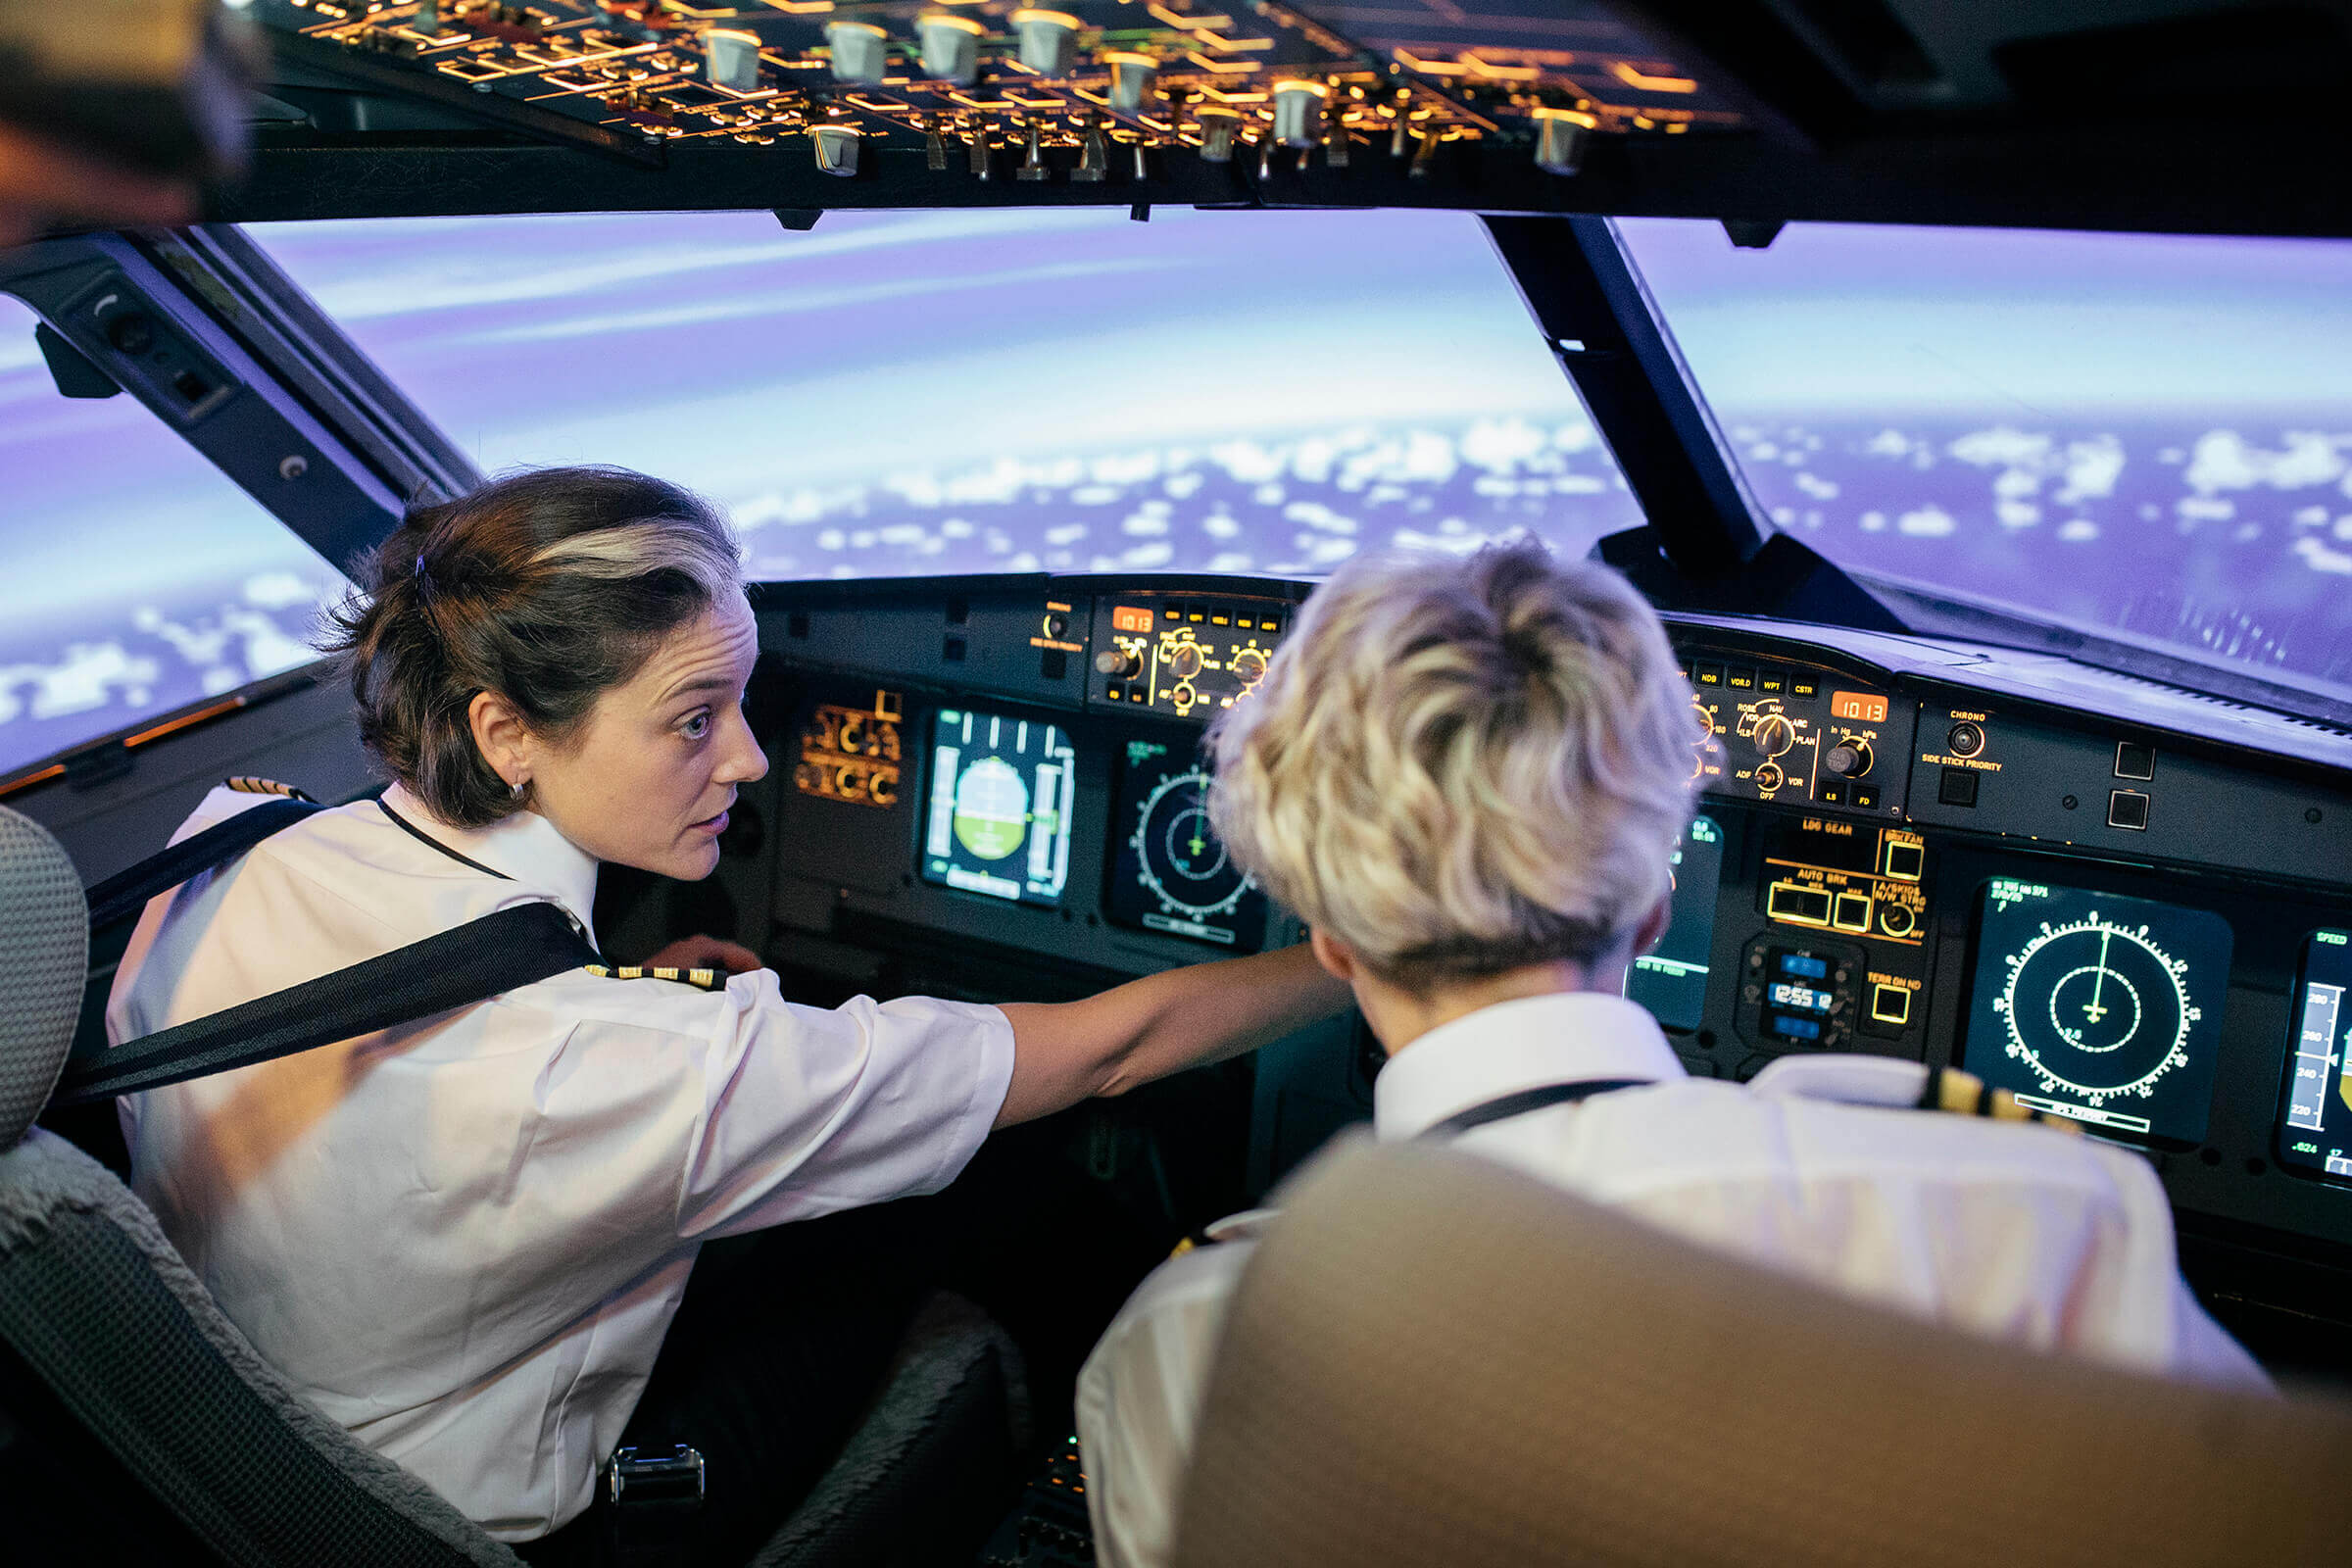 Technology Soars In Advancing Critical Communication, Safety For Pilots,  Passengers - Purdue University News